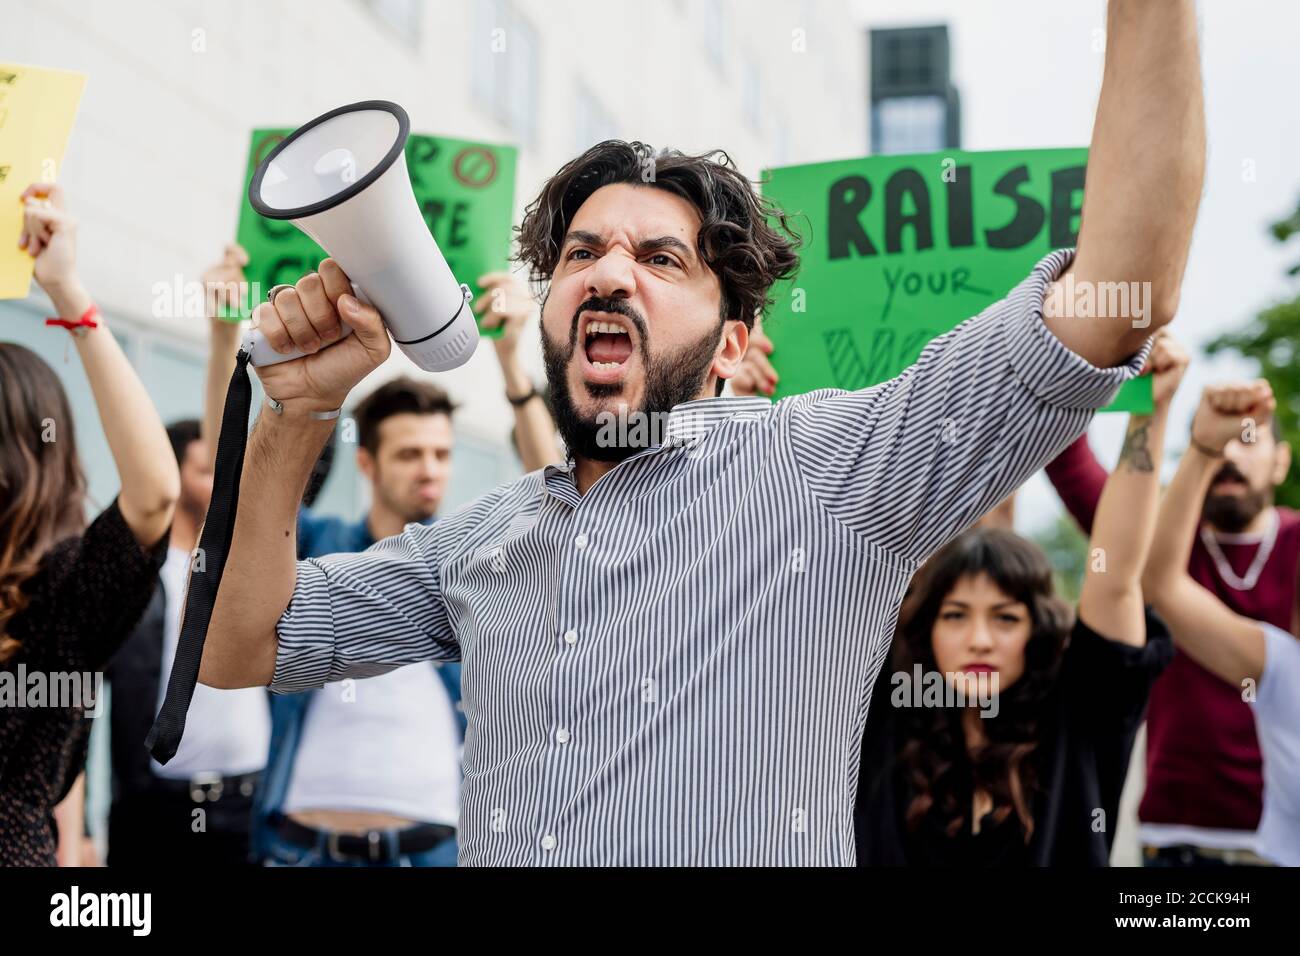 Man holding megaphone screaming with protestors on street Stock Photo